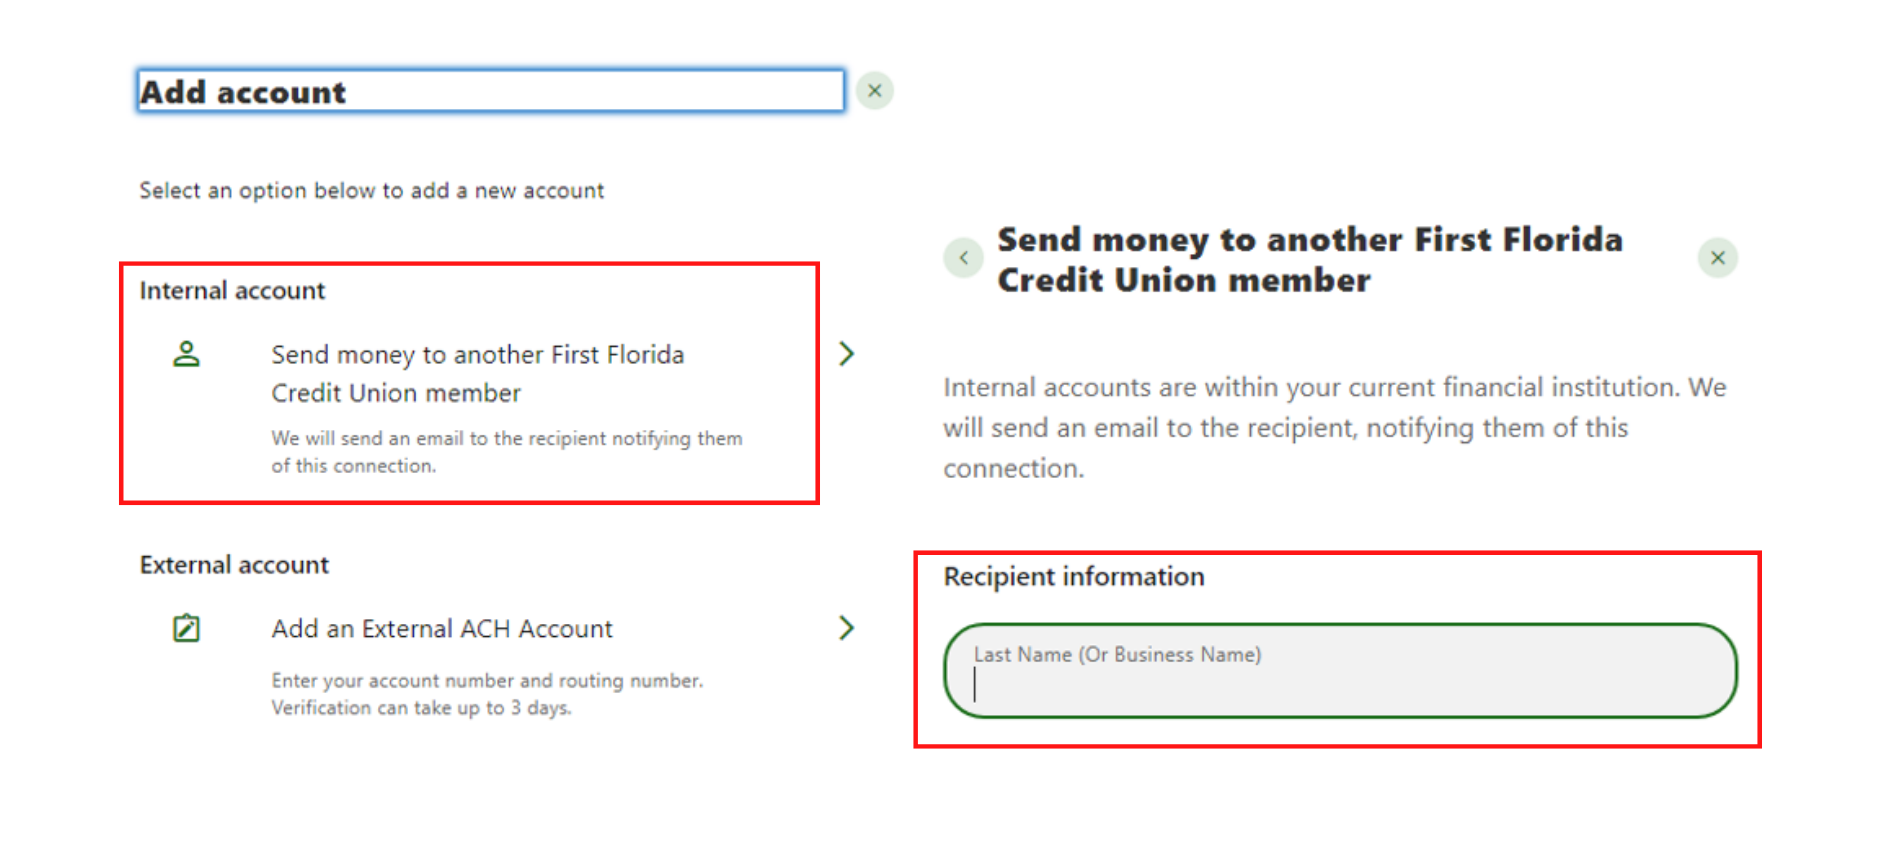 Screen capture showing internal account and recipient information